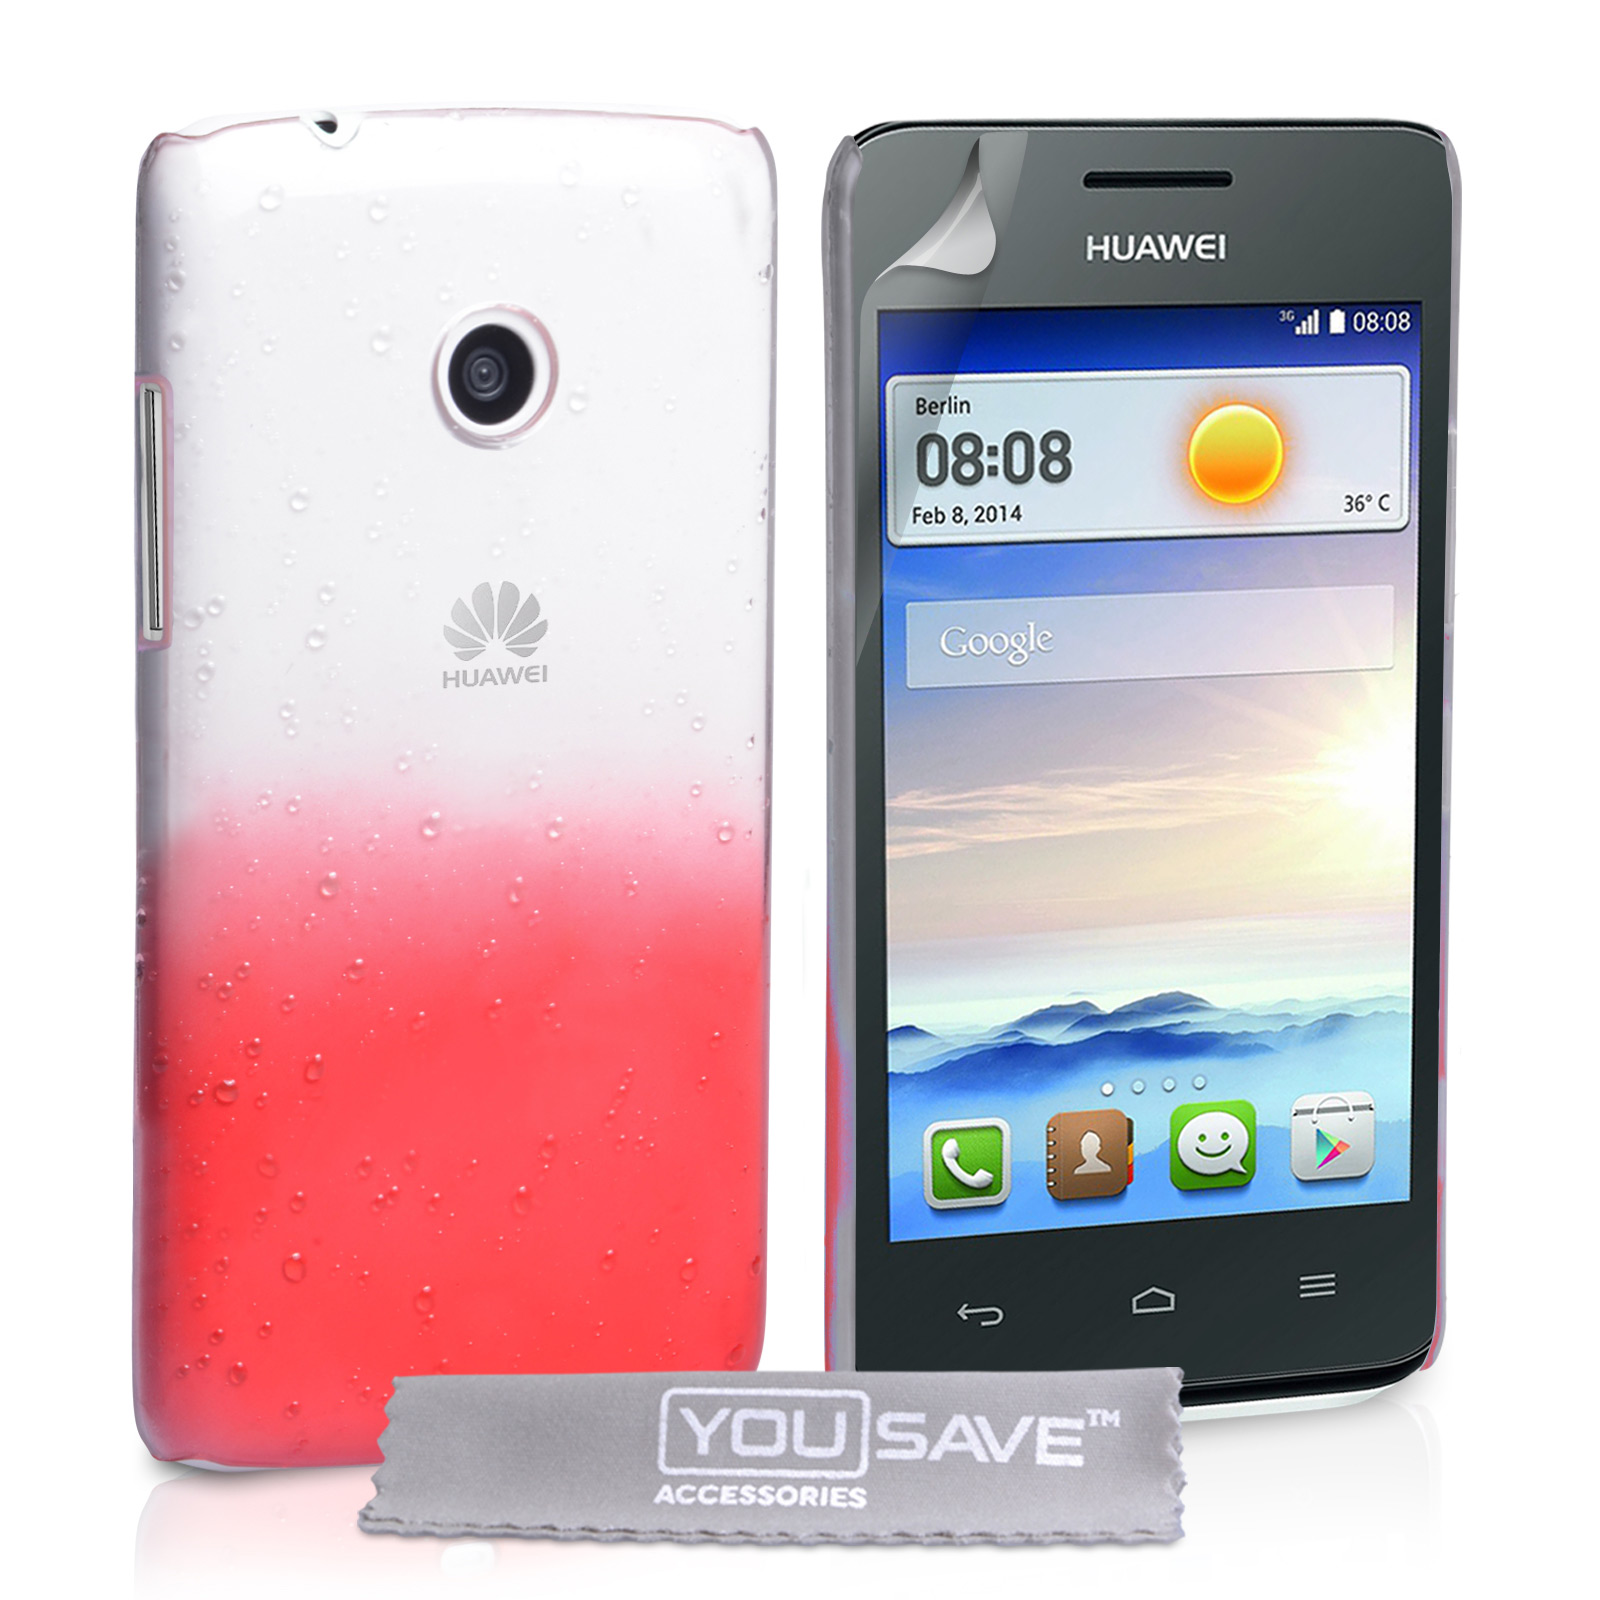 YouSave Accessories Huawei Ascend Y330 Raindrop Hard Case - Red-Clear